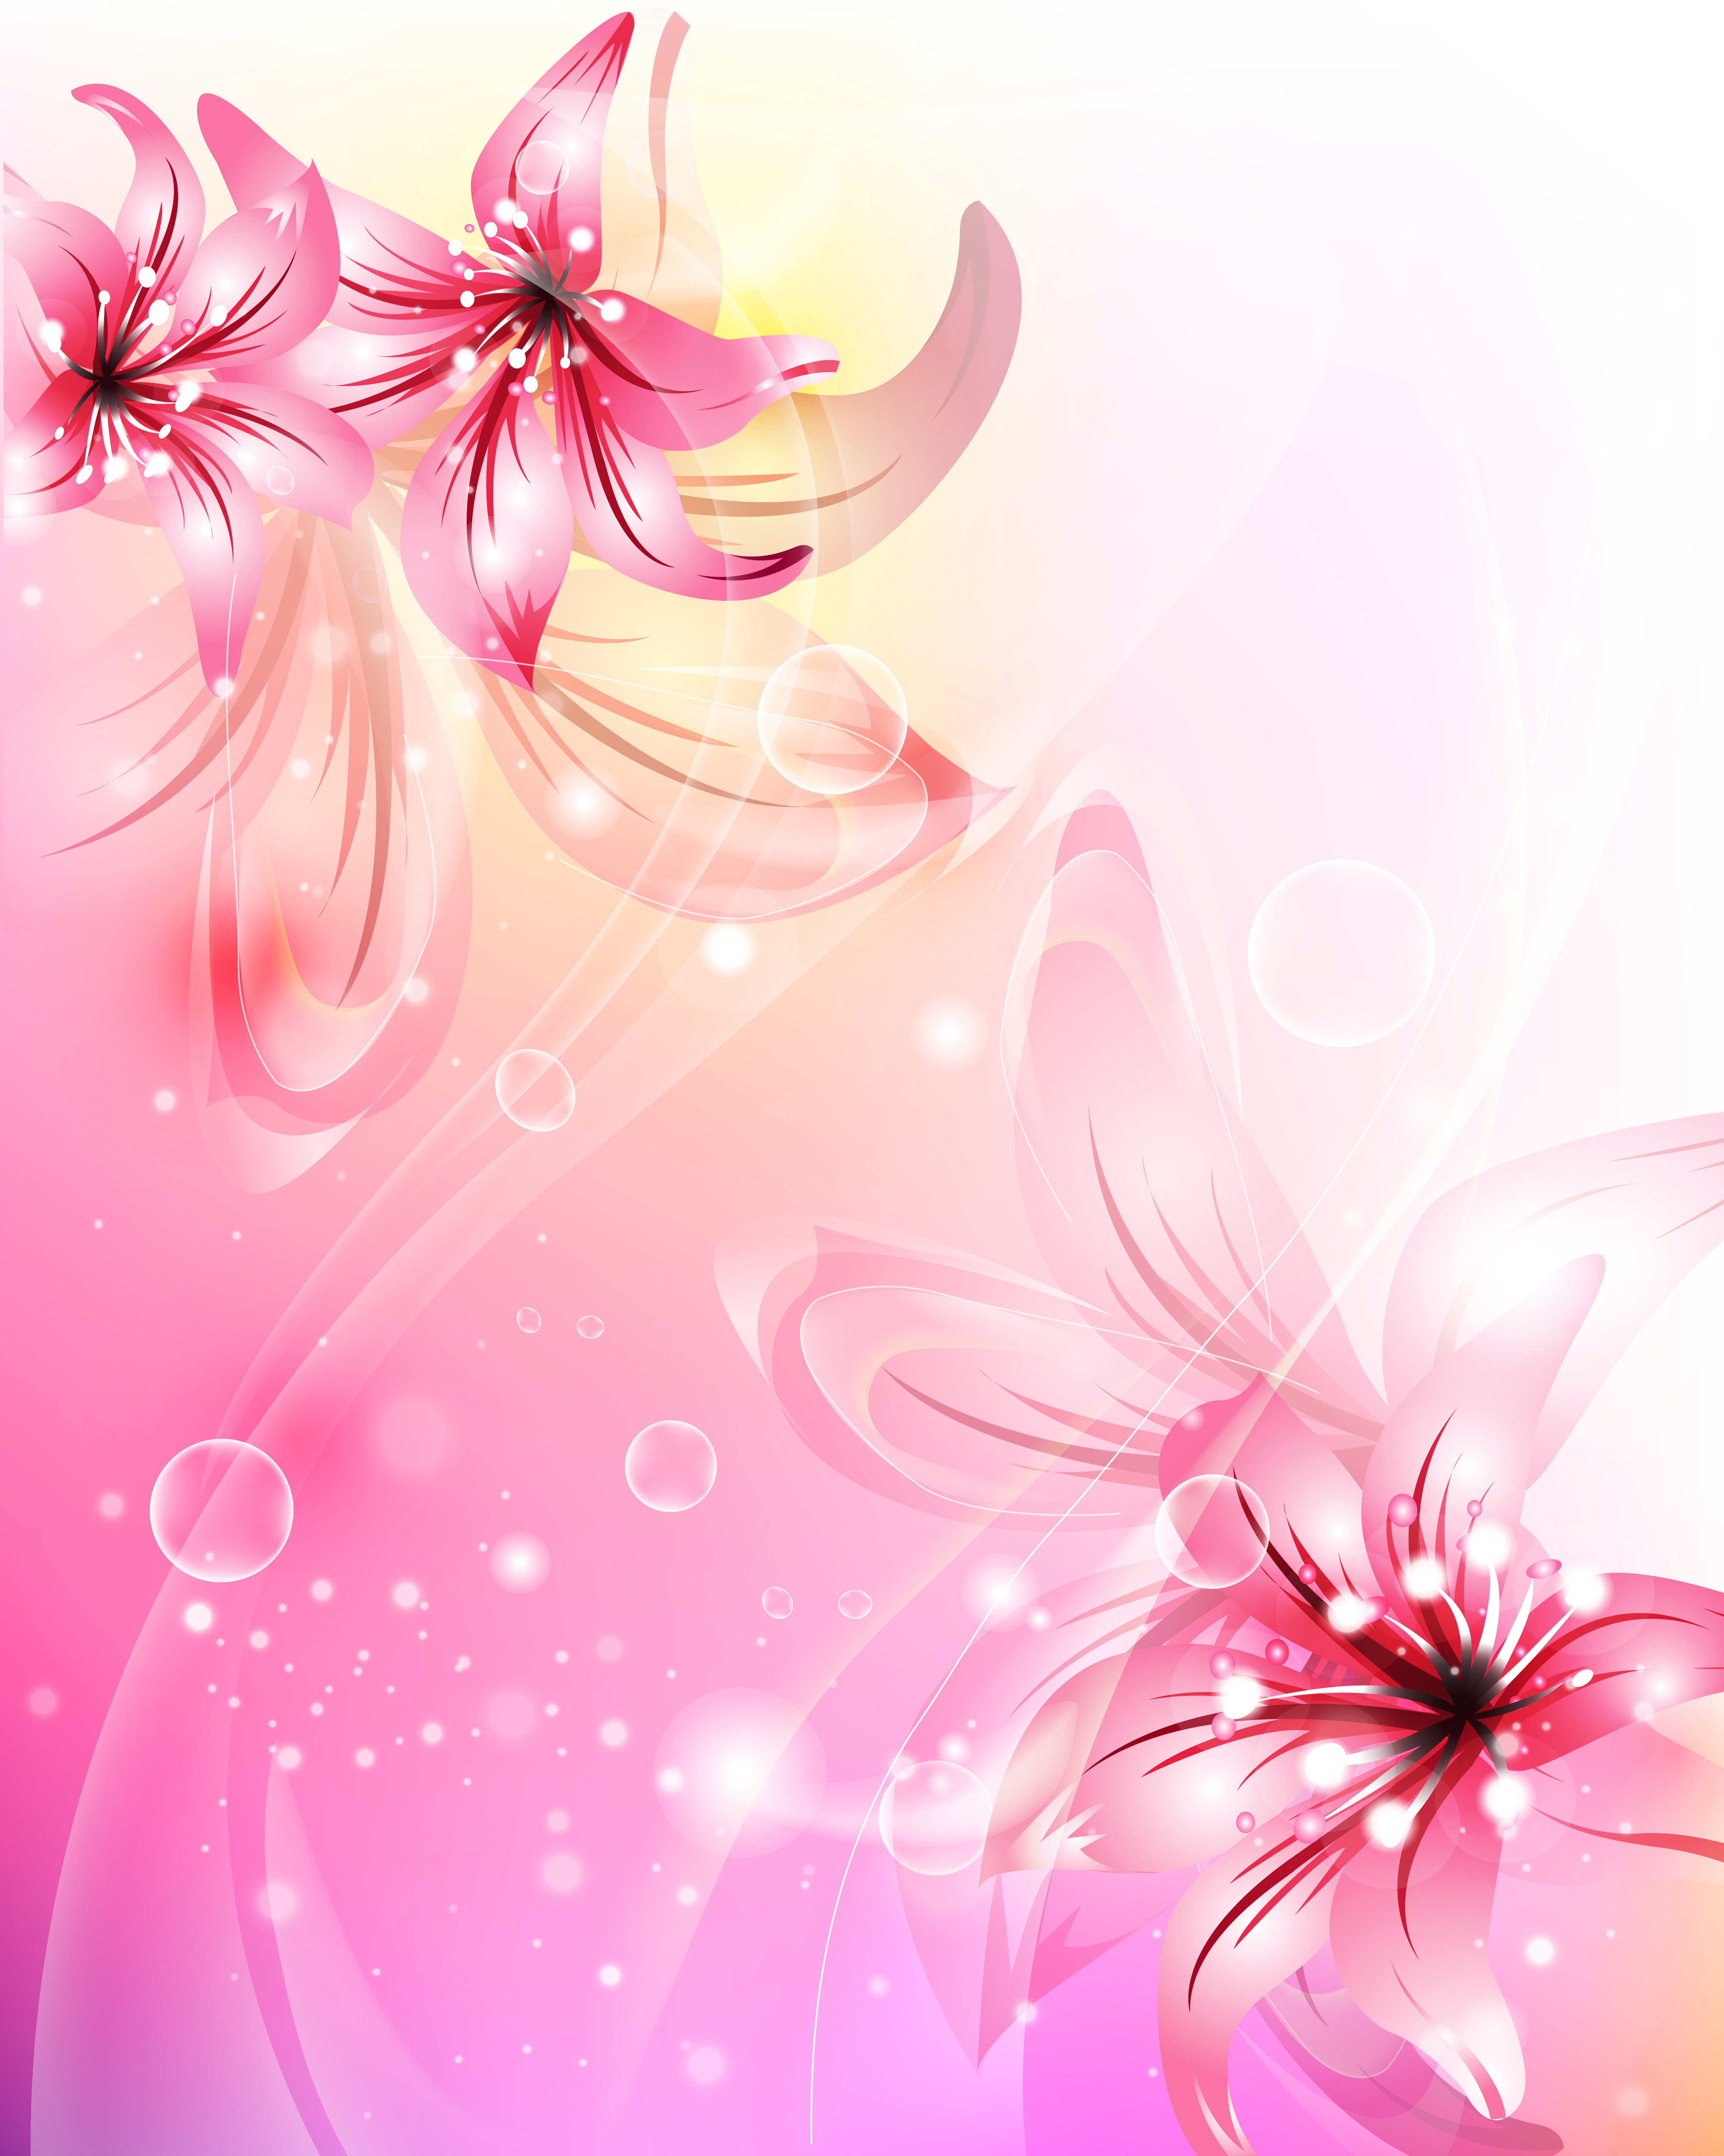 Free download pink flowers background photo hd wide wallpaper of flowers [3997x5000] for your